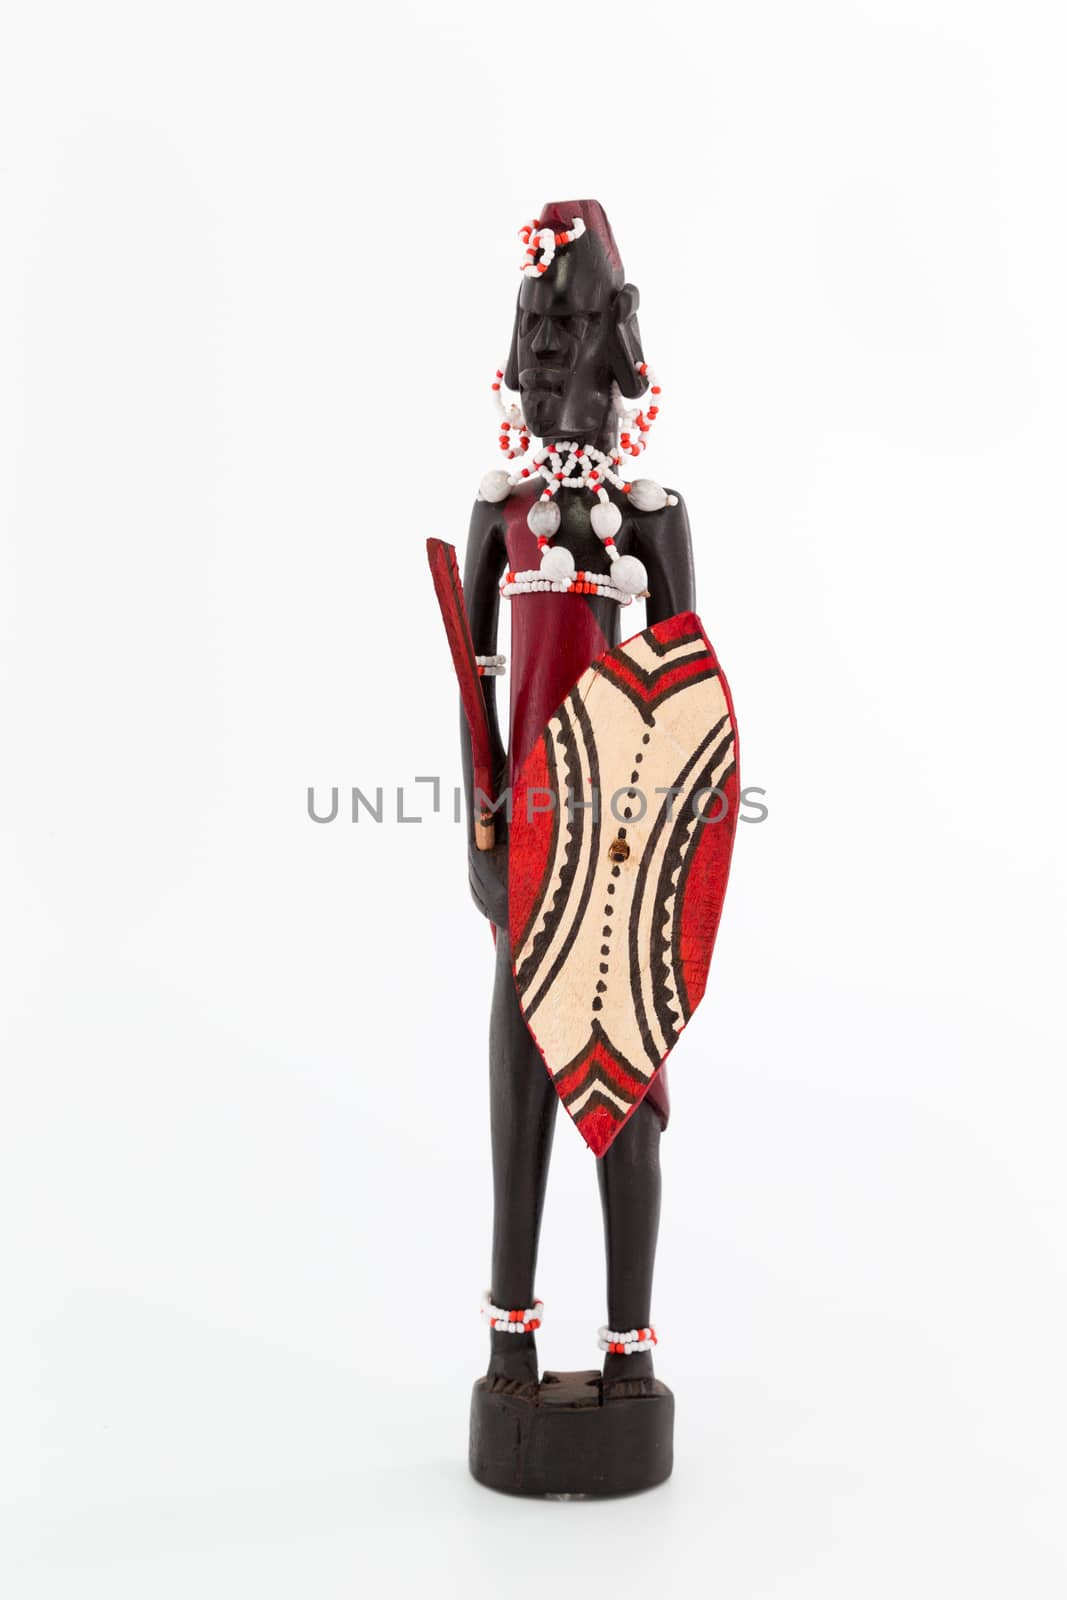 A wooden figure of a Maasai man on white background